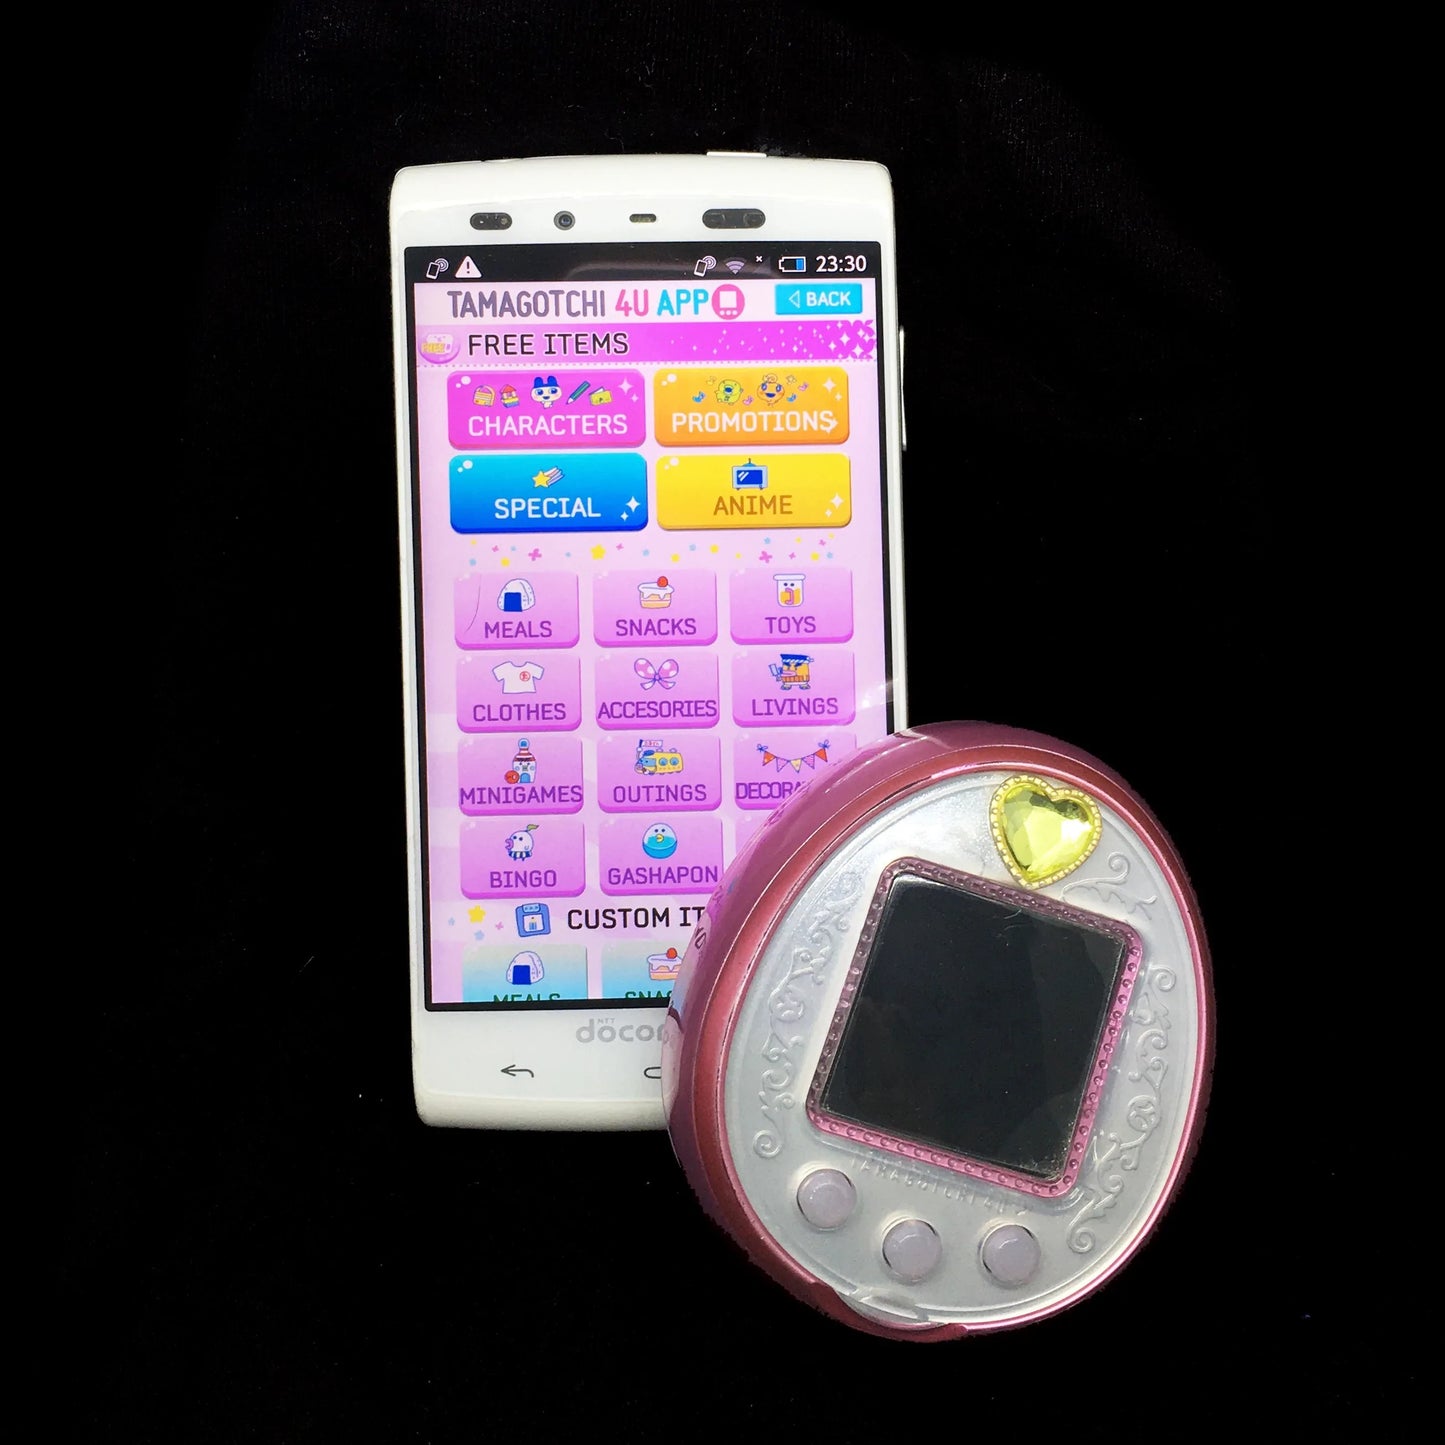 NFC & Infrared 2-in-1 Tamagotchi Compatible Phone - Locked (cannot use with SIM card) Fuzzy N Chic